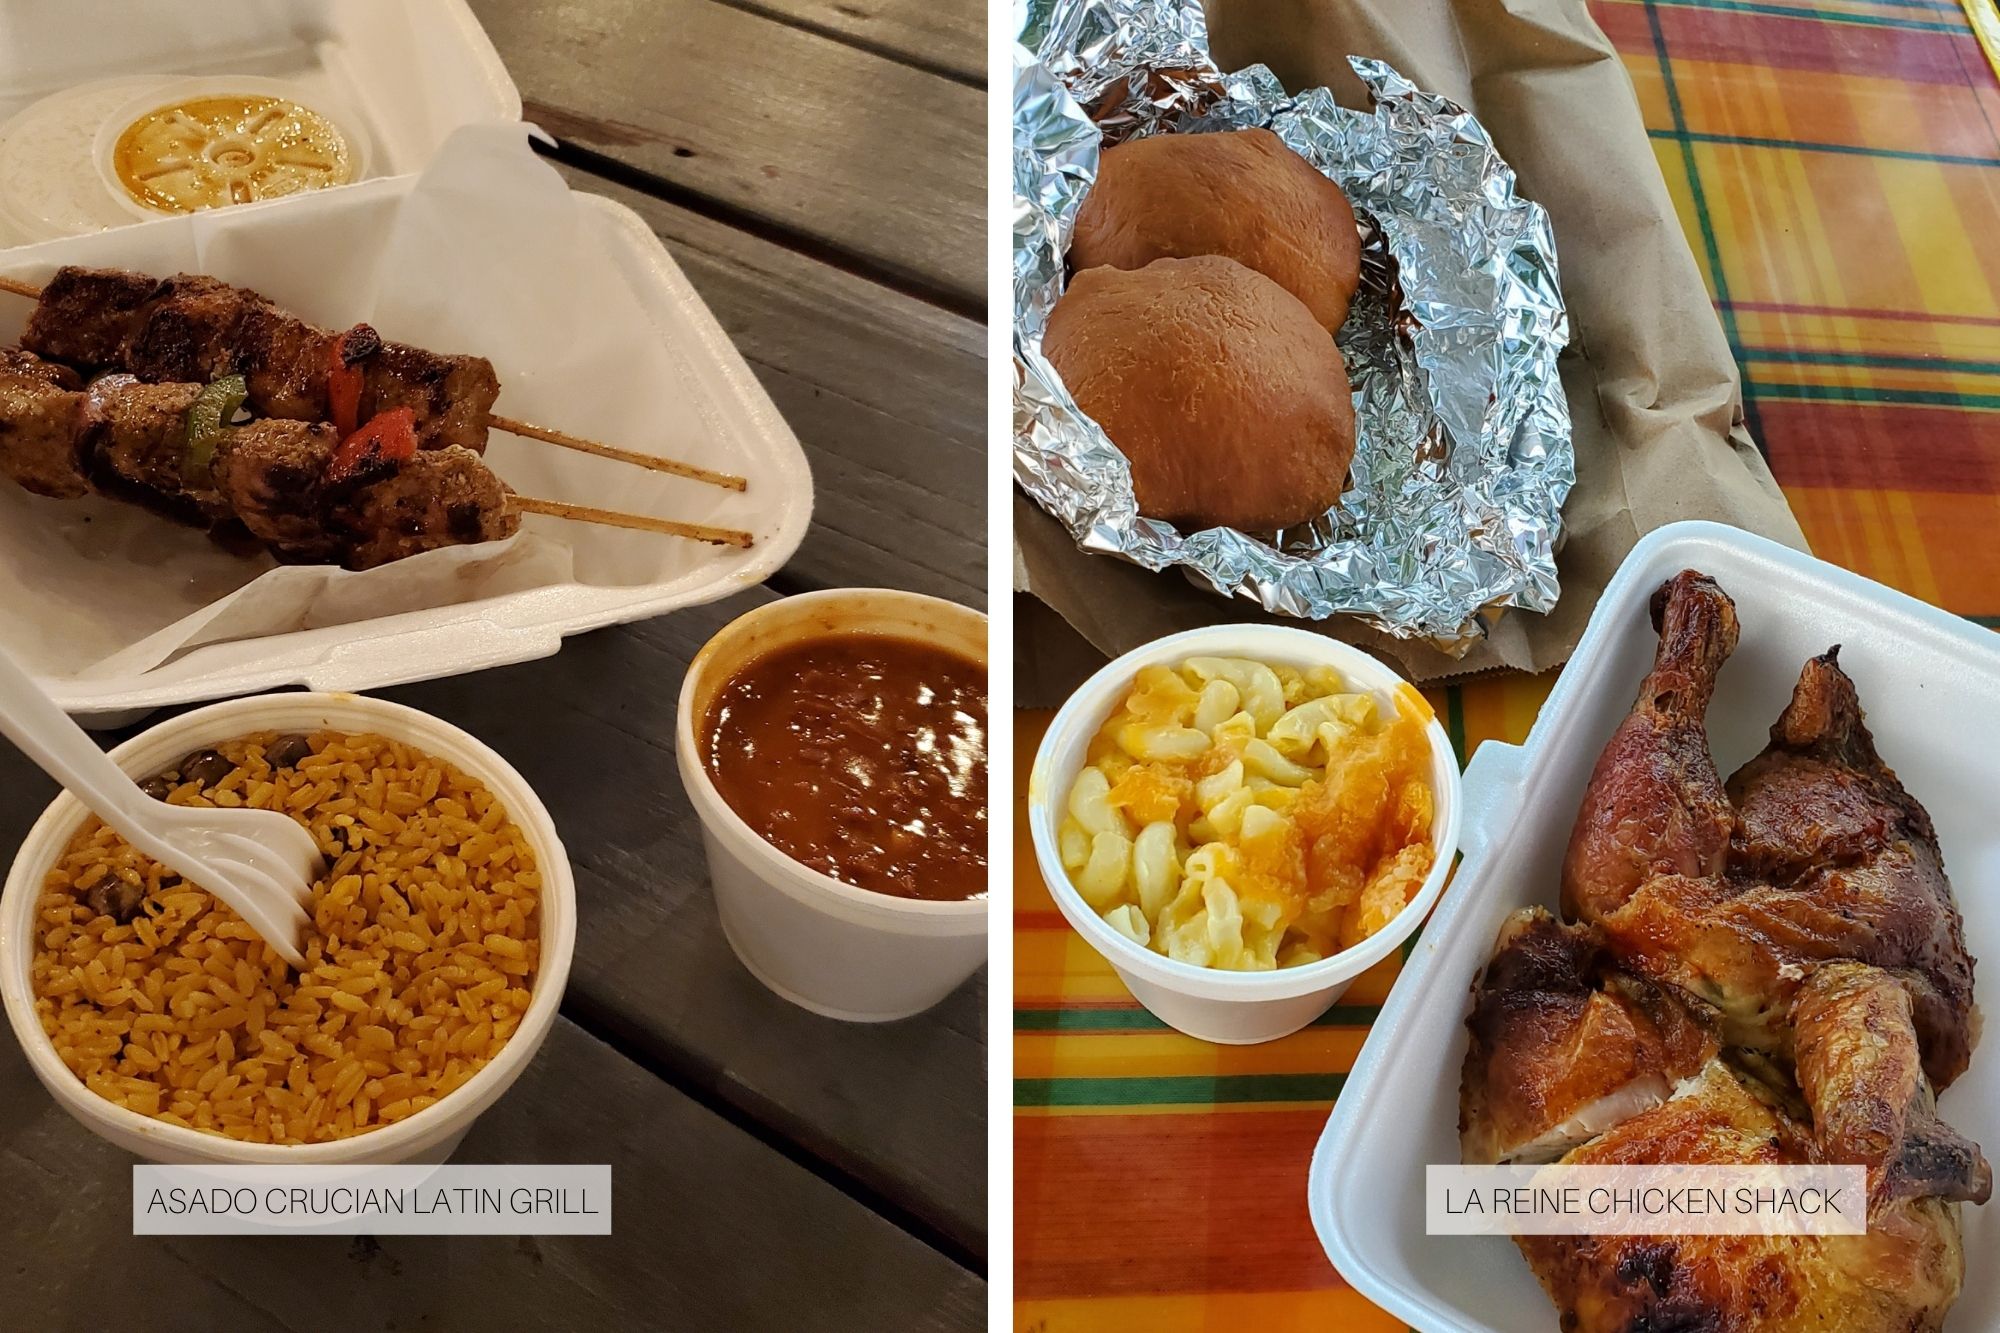 Left: skewers of meat on a tray with containers of rice and beans; right: roasted chicken with mac and cheese and two johnnycakes